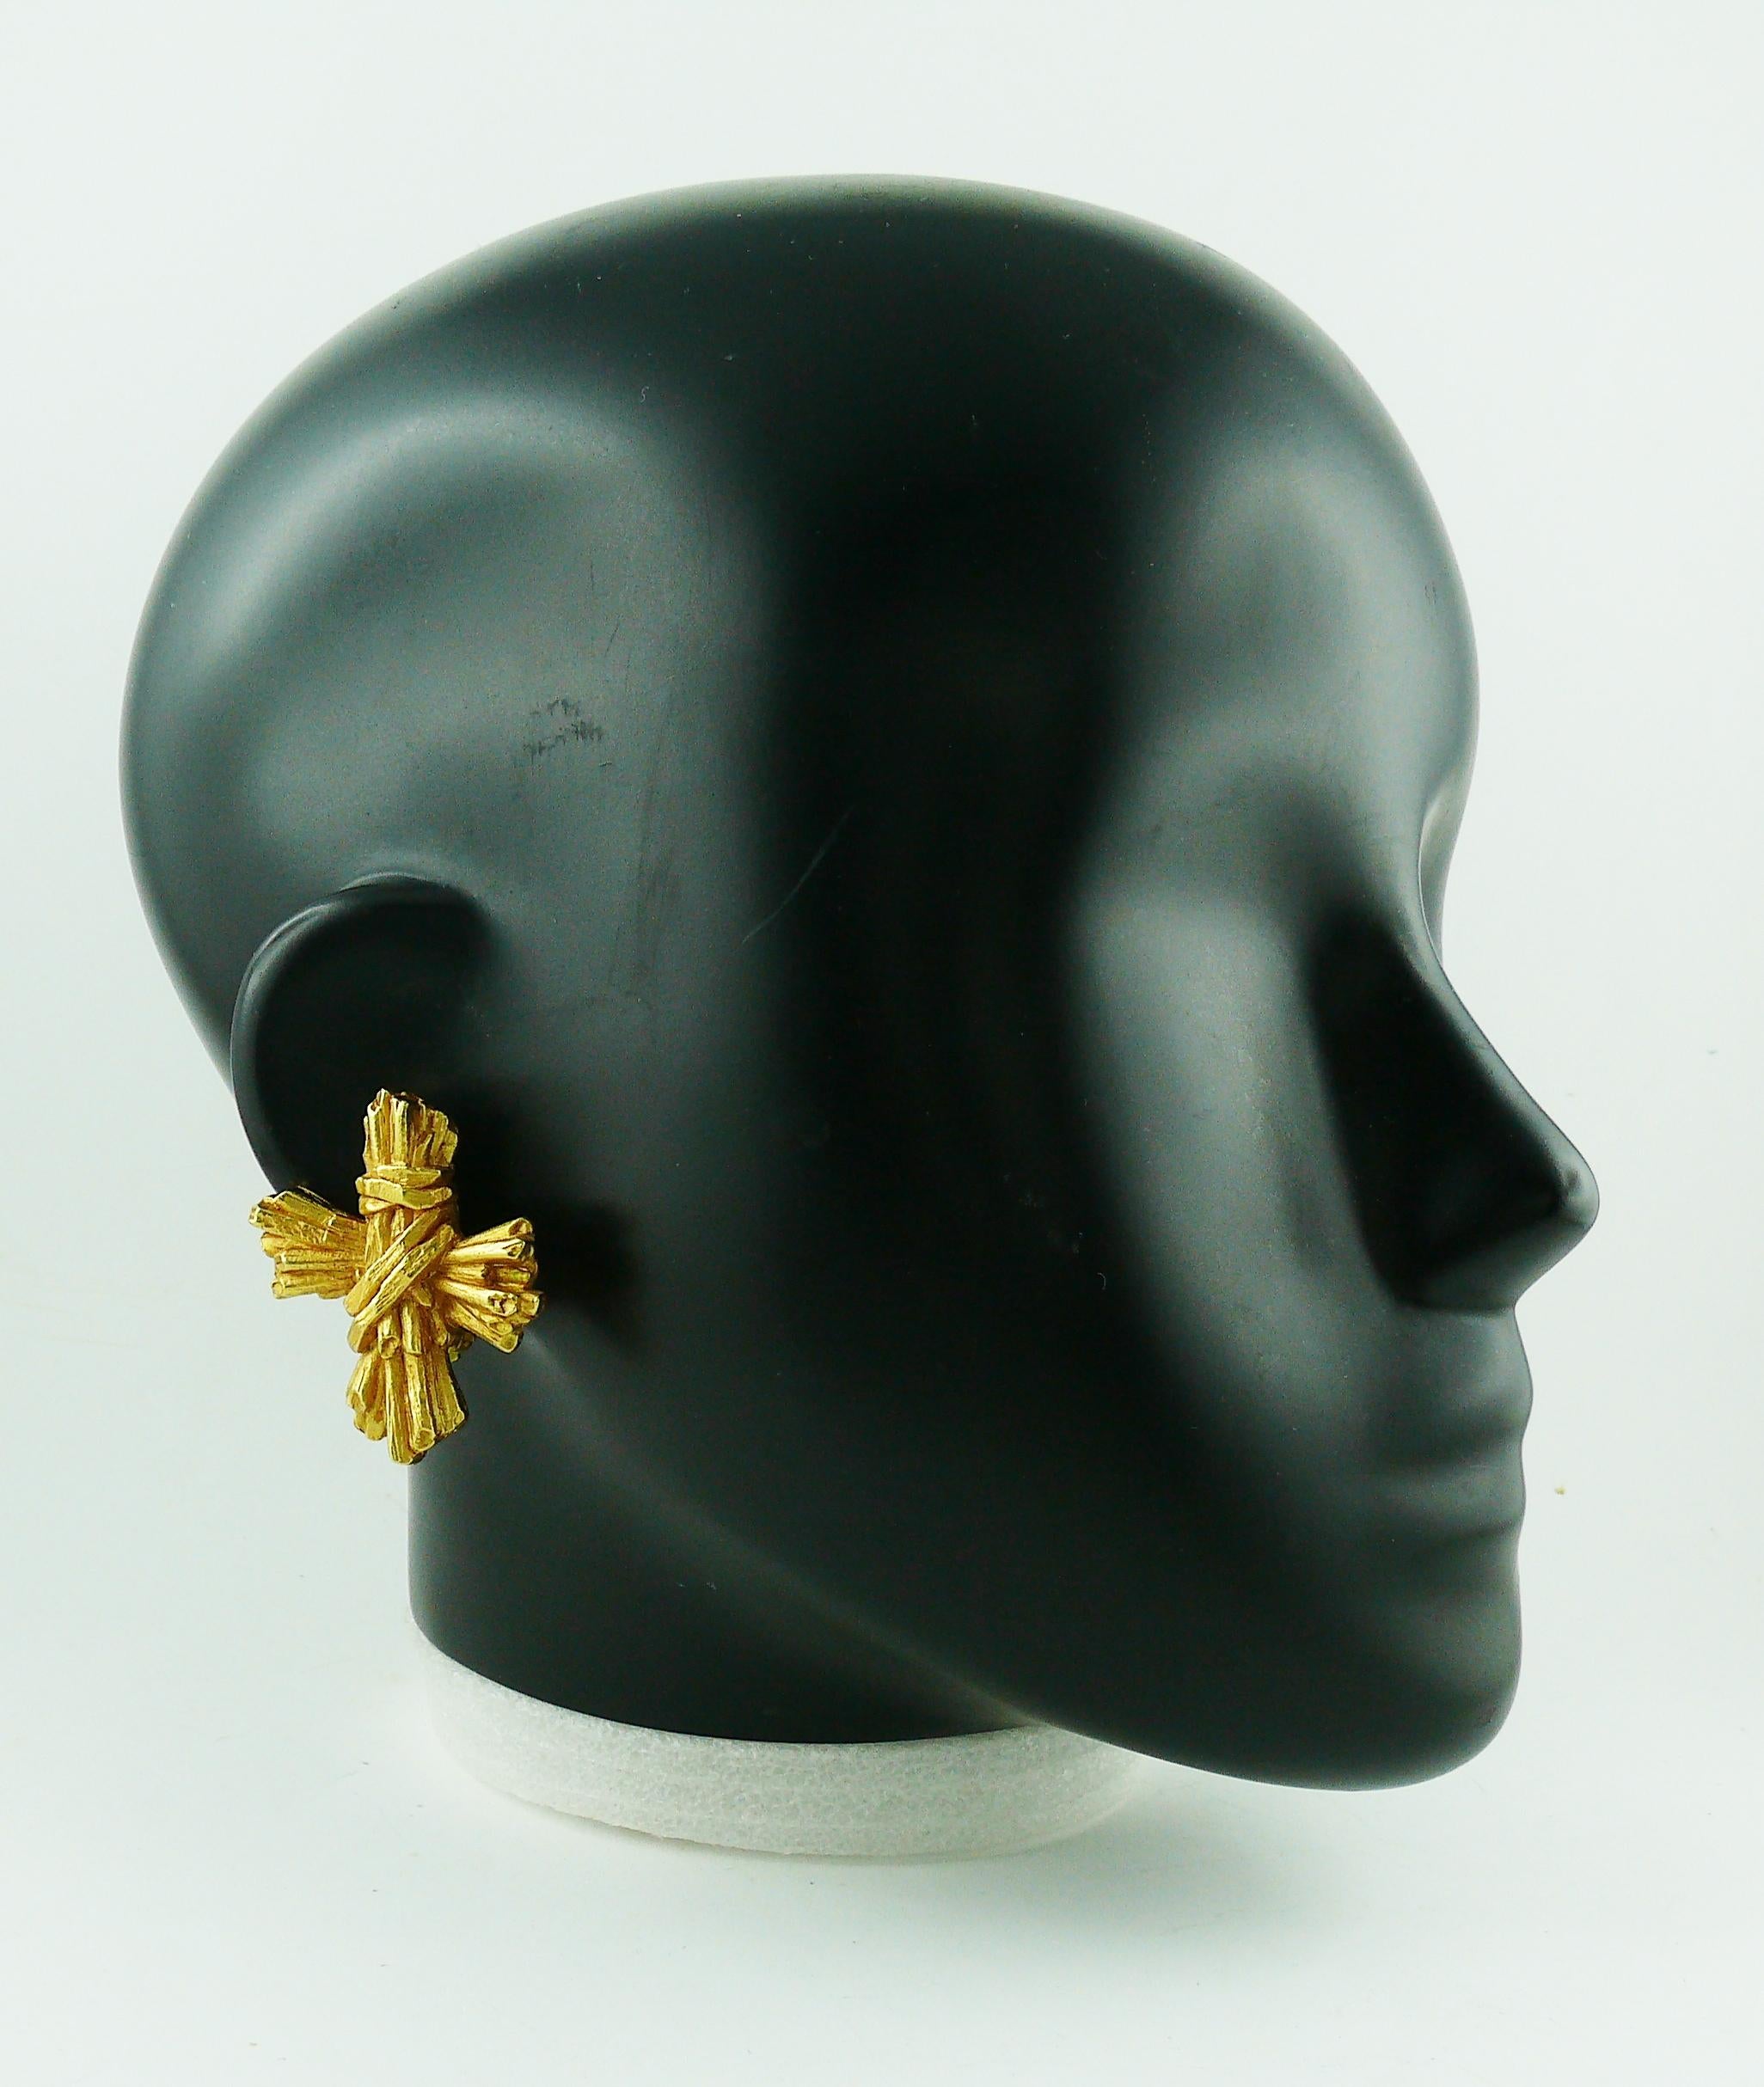 CHRISTIAN LACROIX vintage gold toned bundle pattern cross clip-on earrings.

Marked CHRISTIAN LACROIX CL Made in France.

Indicative measurements : height 4.2 cm (1.65 inches) / width 3.5 cm (1.38 inches).

JEWELRY CONDITION CHART
- New or never